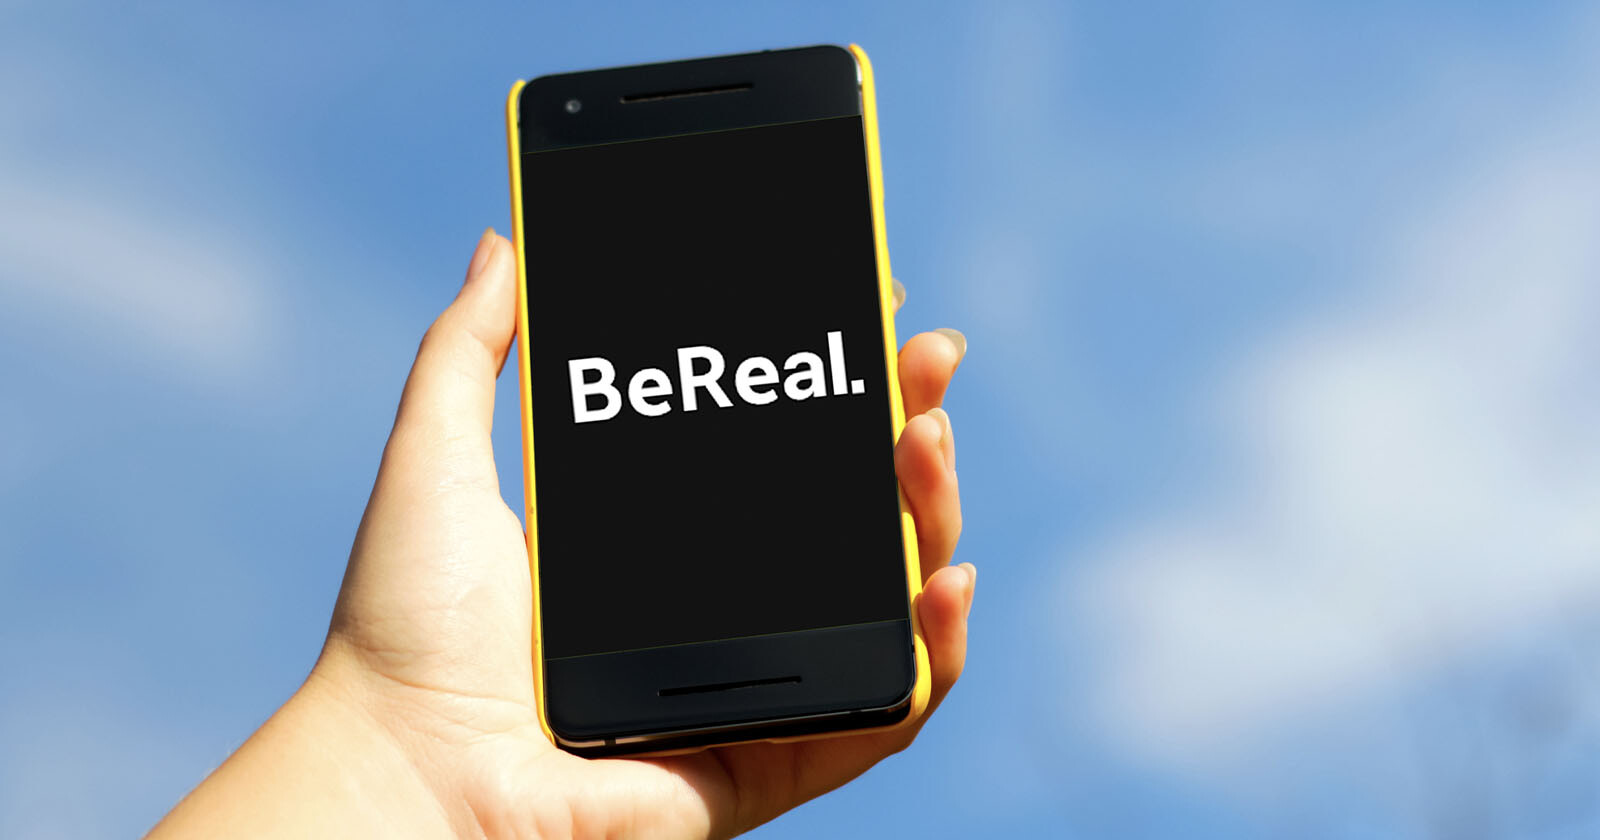 In Bid to Stay Relevant, BeReal Rolls Out New Photo Feed of Famous People